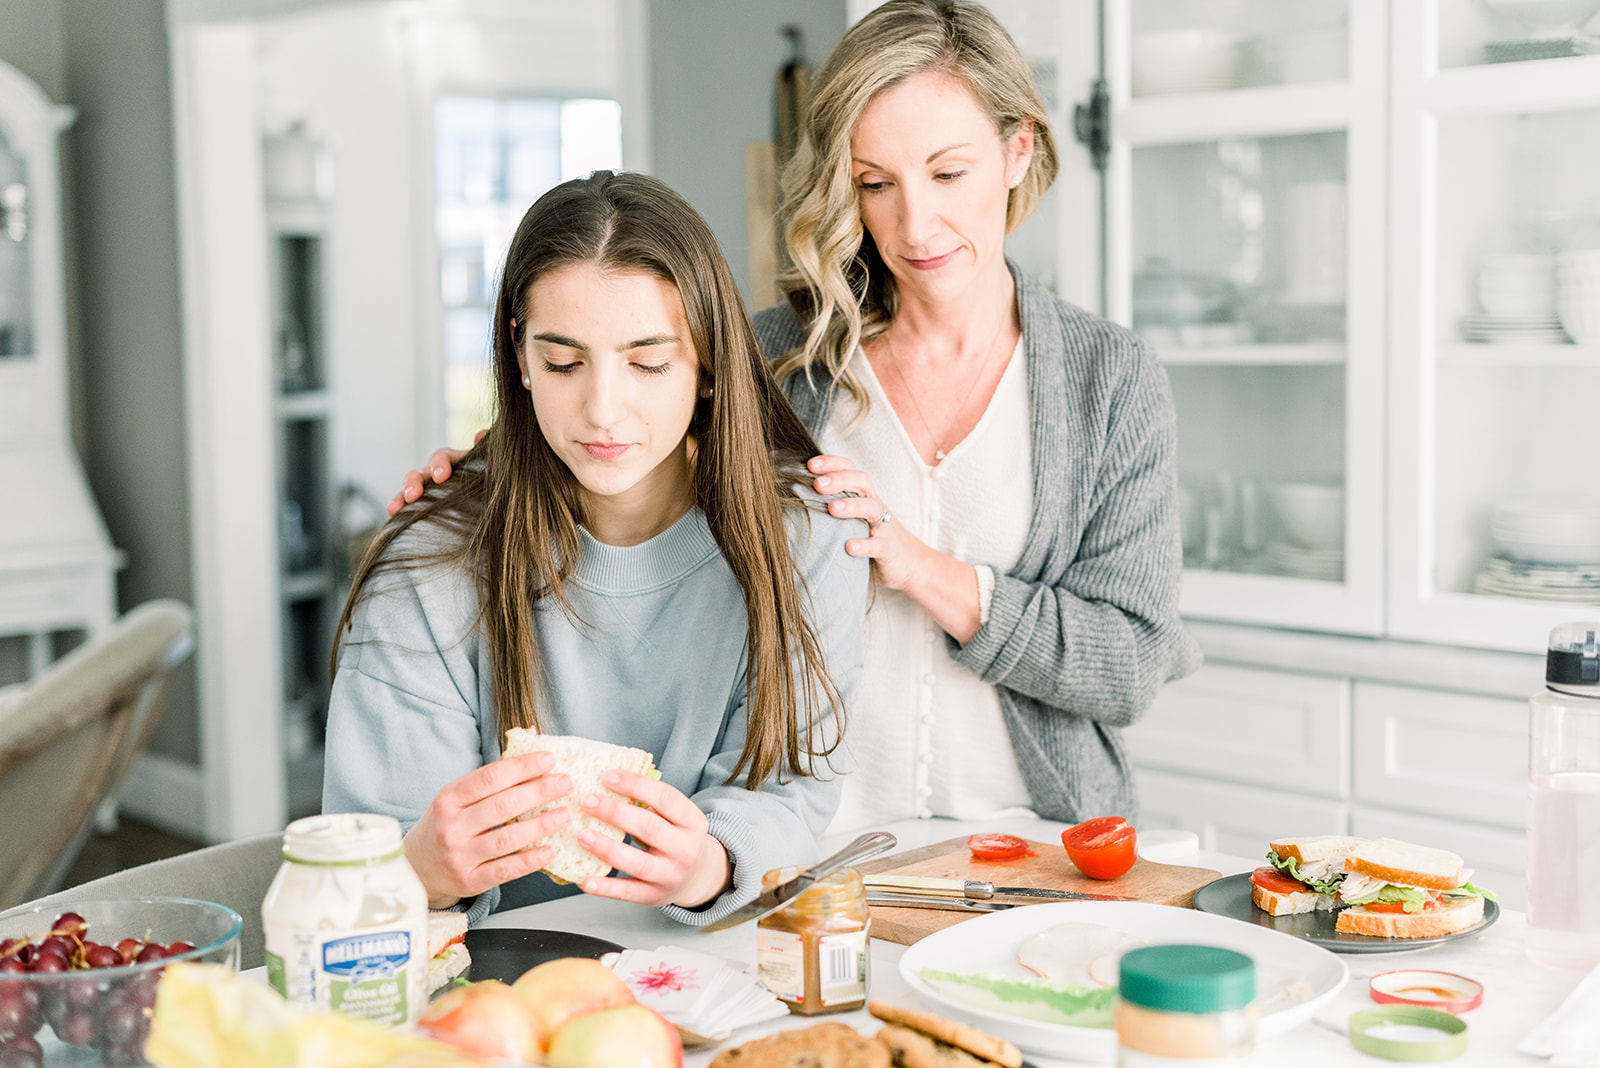 Parent Support In Eating Disorder Recovery